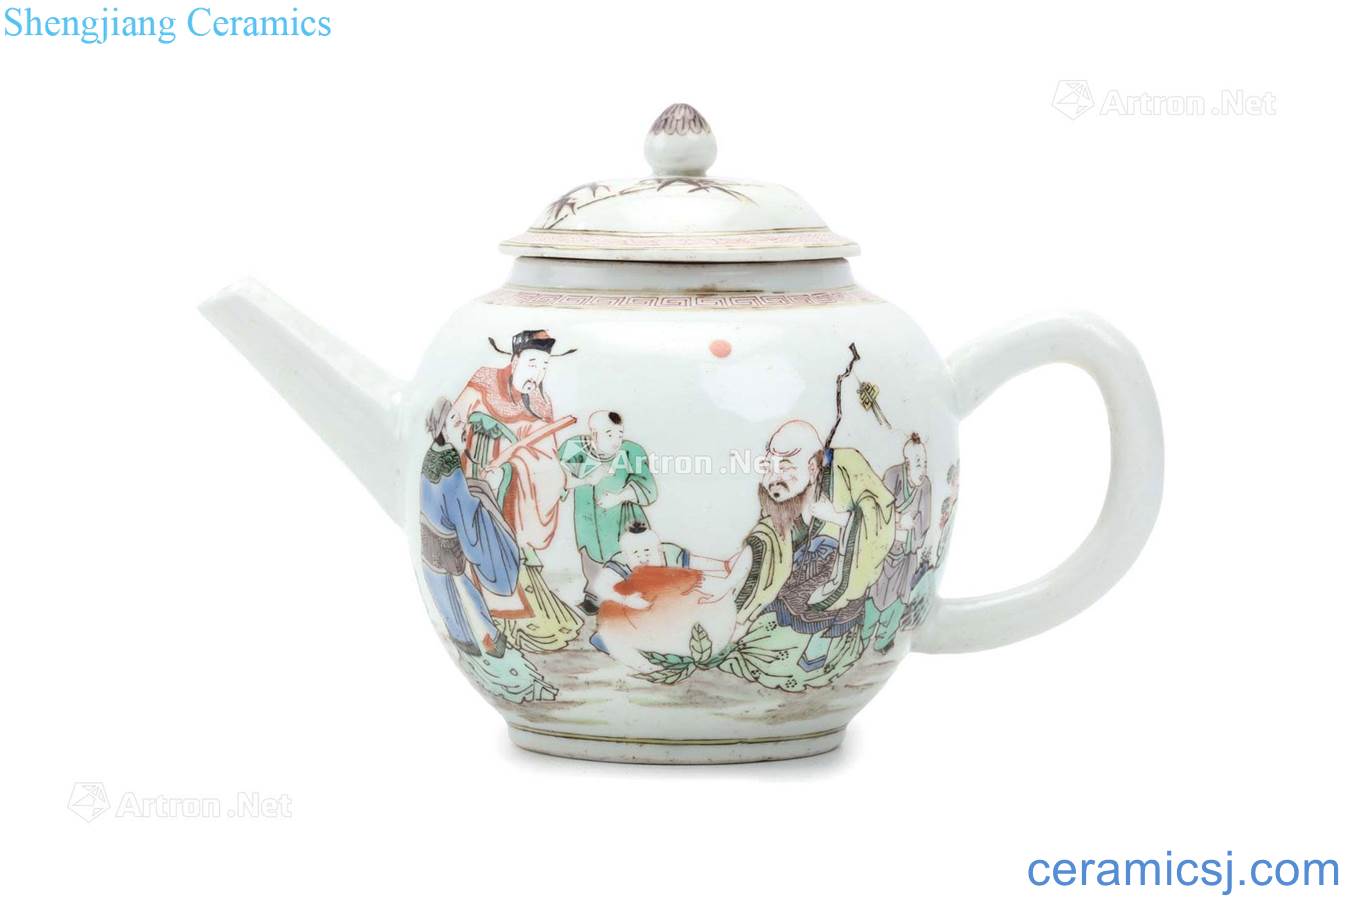 Qing 19th century decorated colorful characters and cover the teapot